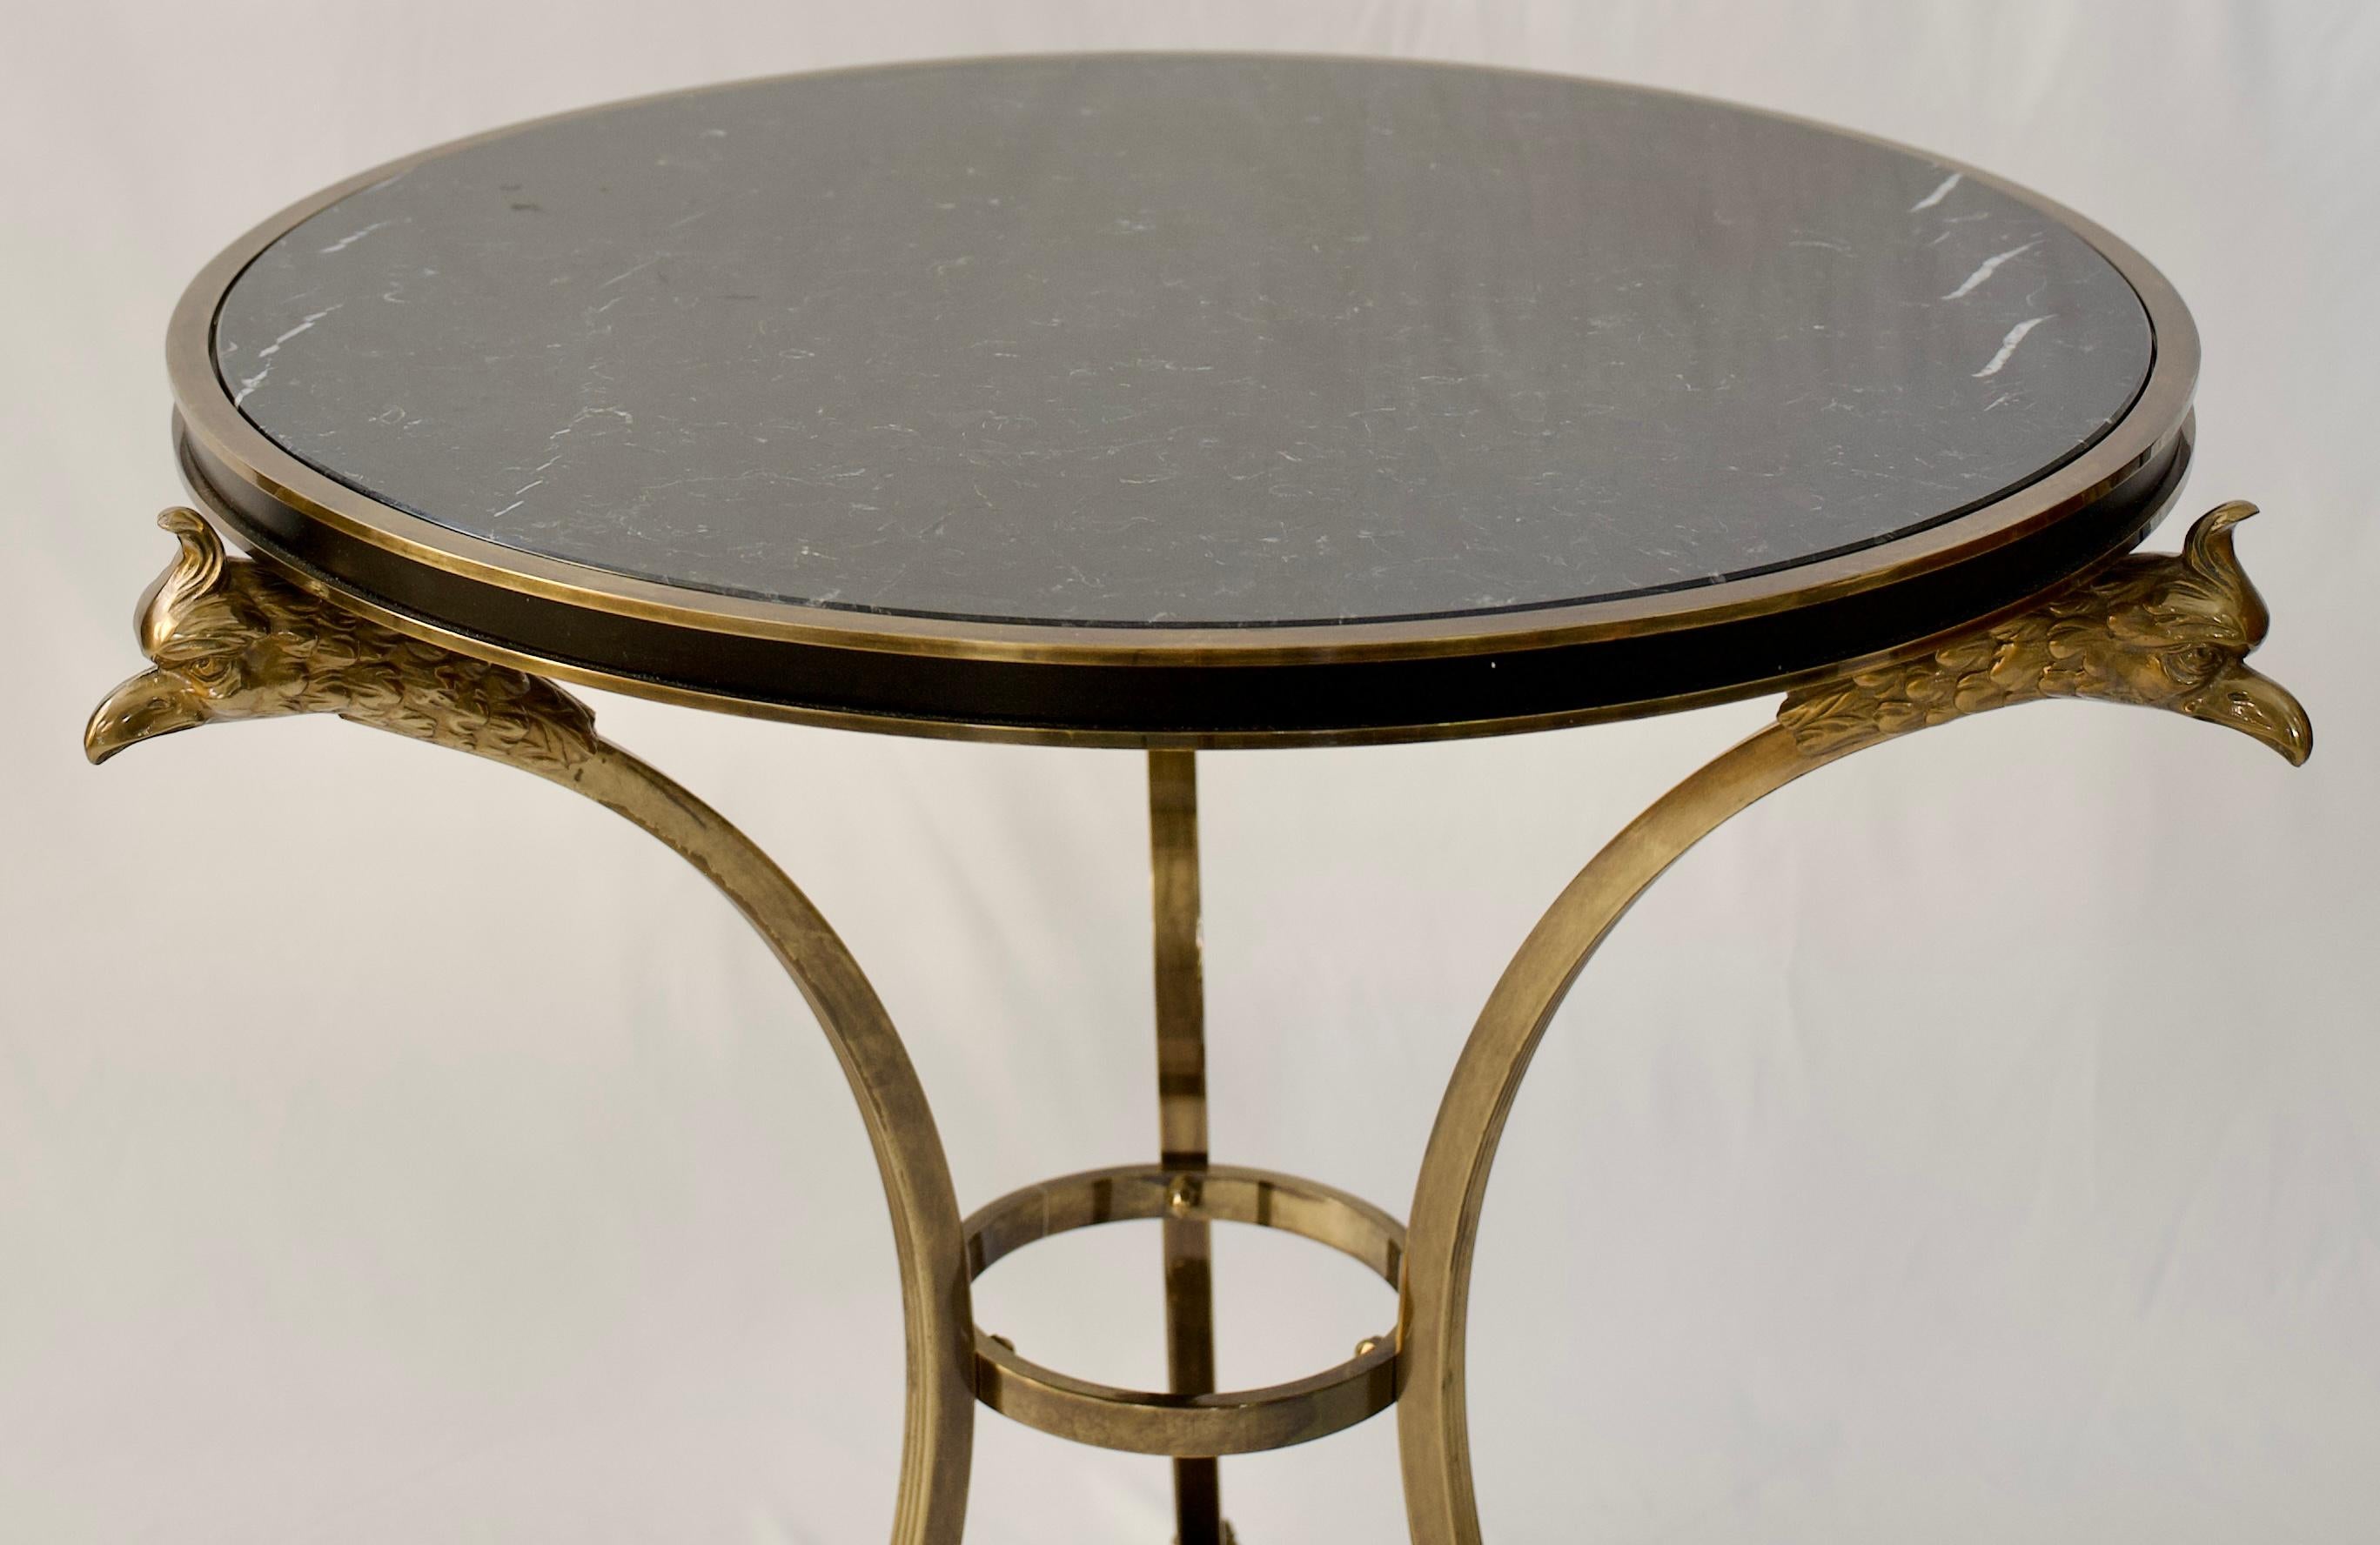 A very fine pair of Alberto Orlandi Neoclassical style Gueridon tables with phoenix head and hoof motifs in brass and steel with original black marble tops, circa 1970's.

These stylish black marble top side tables by Alberto Orlandi designed